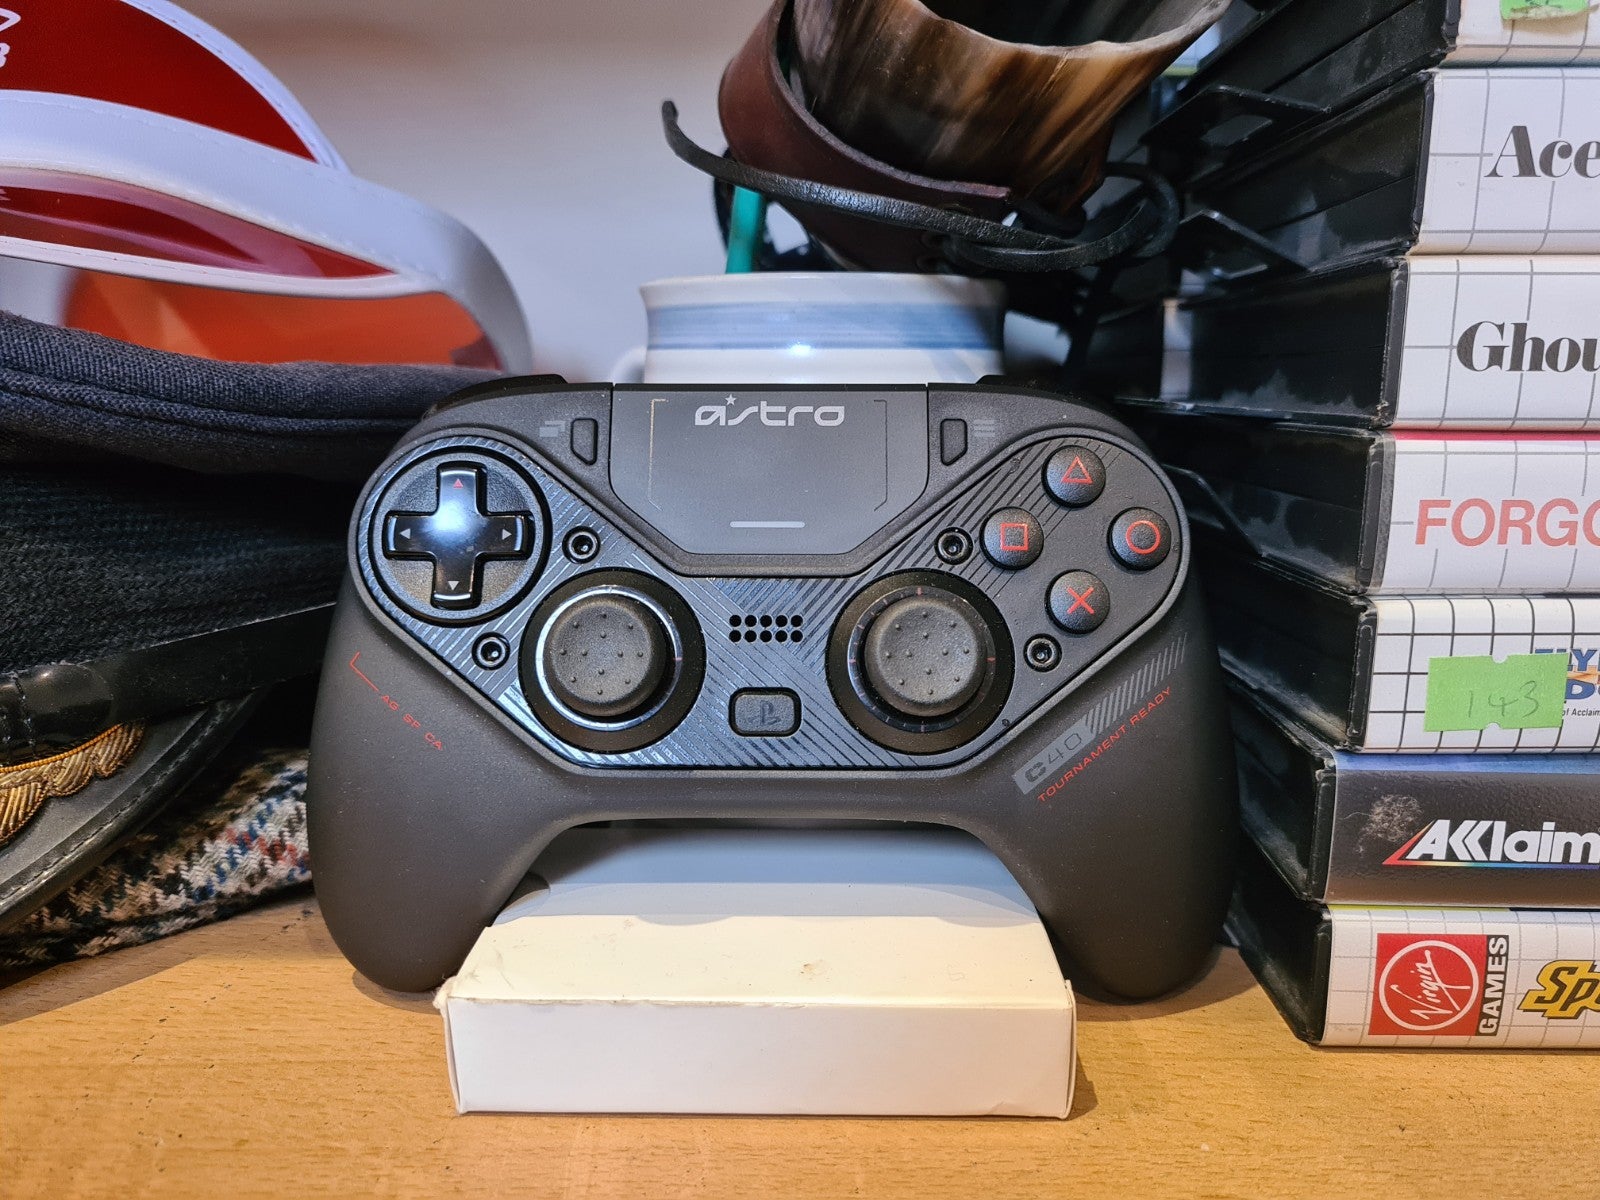 Astro C40 Gaming Controller Review | Trusted Reviews